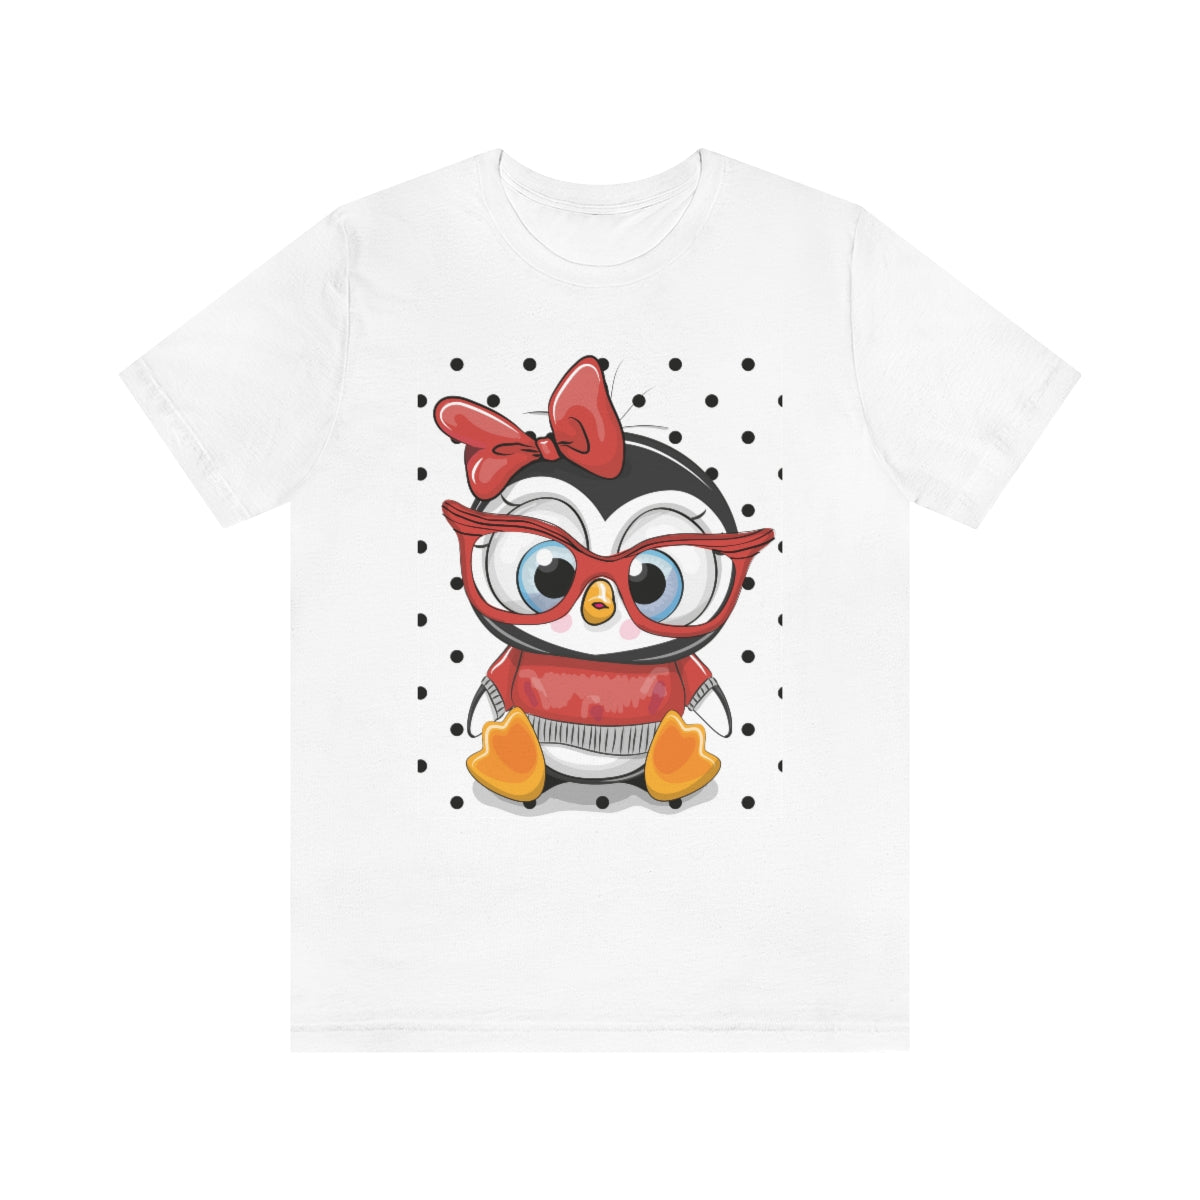 Unisex Jersey Short Sleeve Tee "Cute Cartoon Penguin with red glasses"